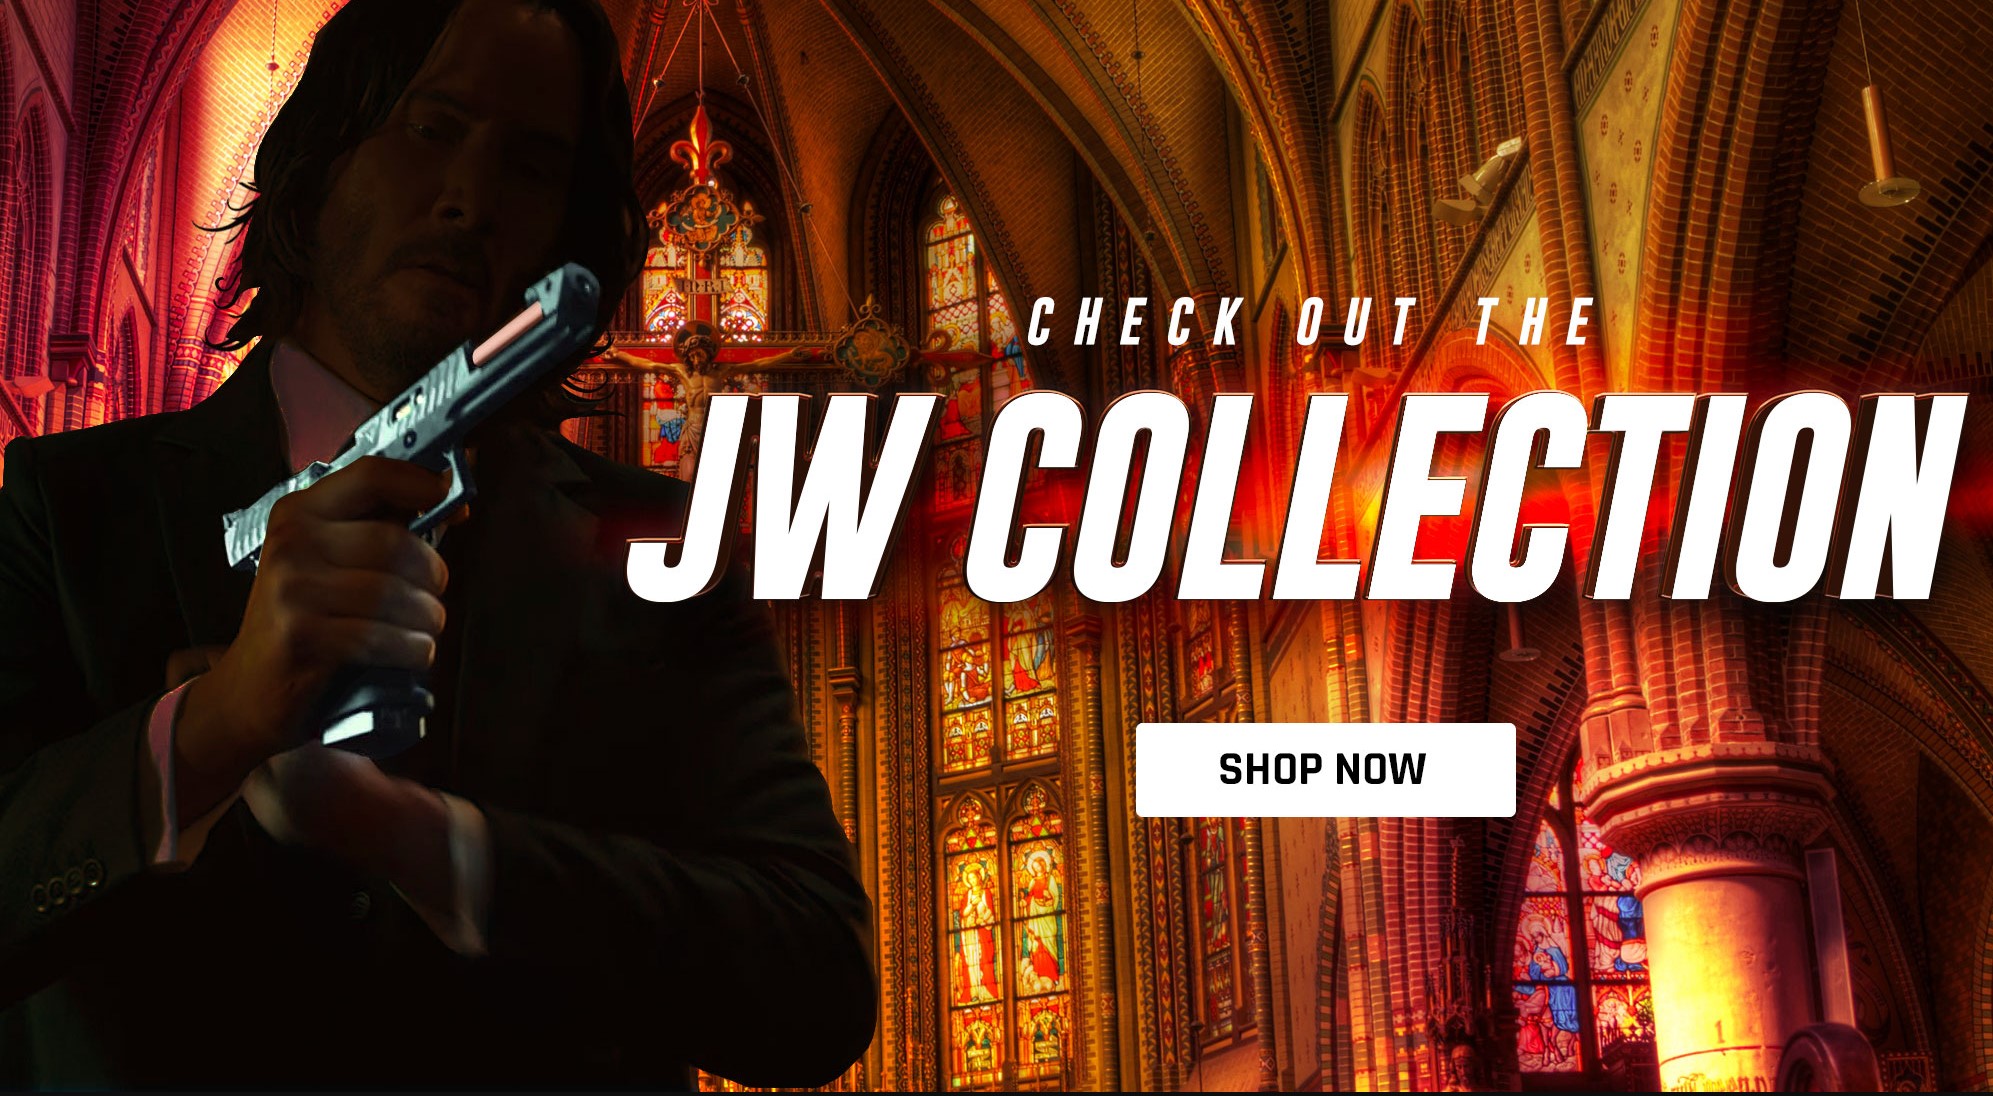 Keanu Reeves as John Wick, holding a handgun, with the text "Check Out the JW Collection" and a "shop now" button